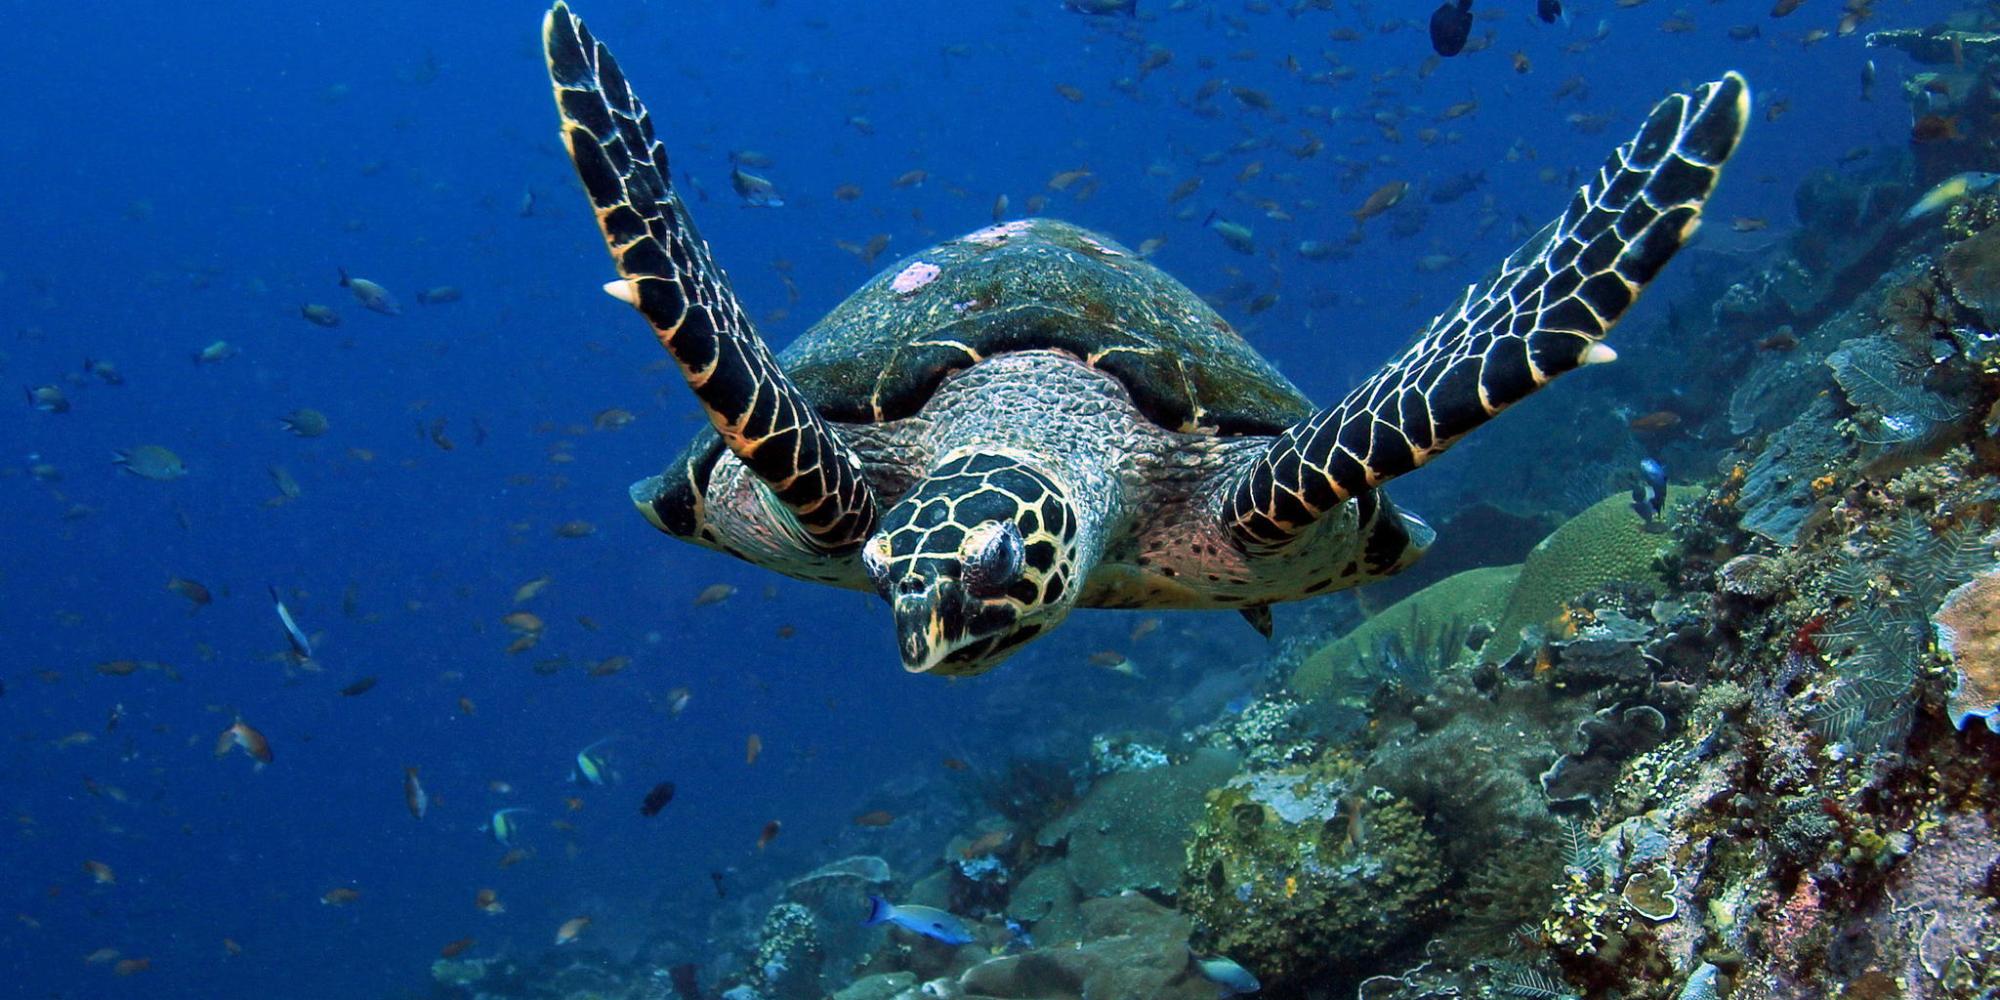 sea-turtles-are-endangered-but-42-000-were-killed-legally-last-year